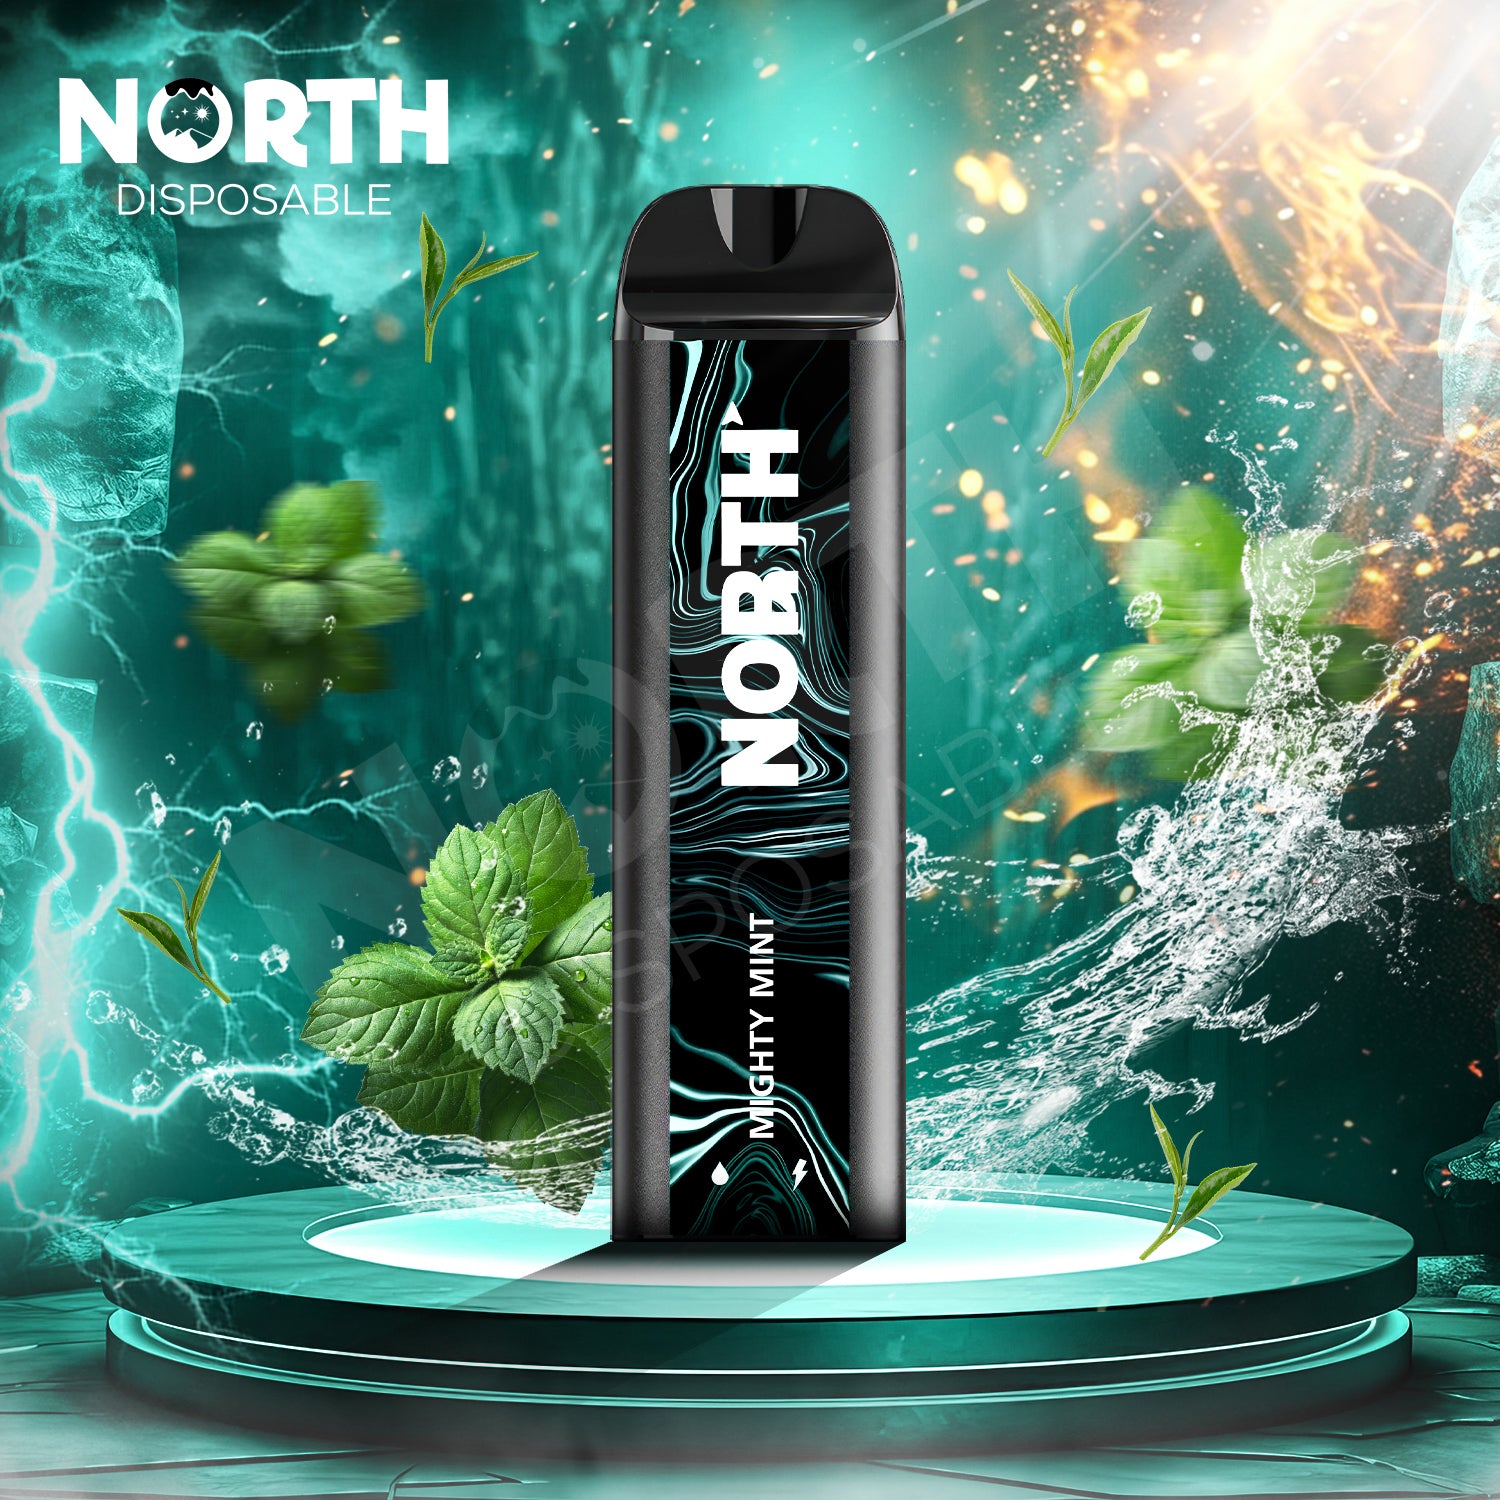 North 5000 Disposable 3% - Mighty Mint